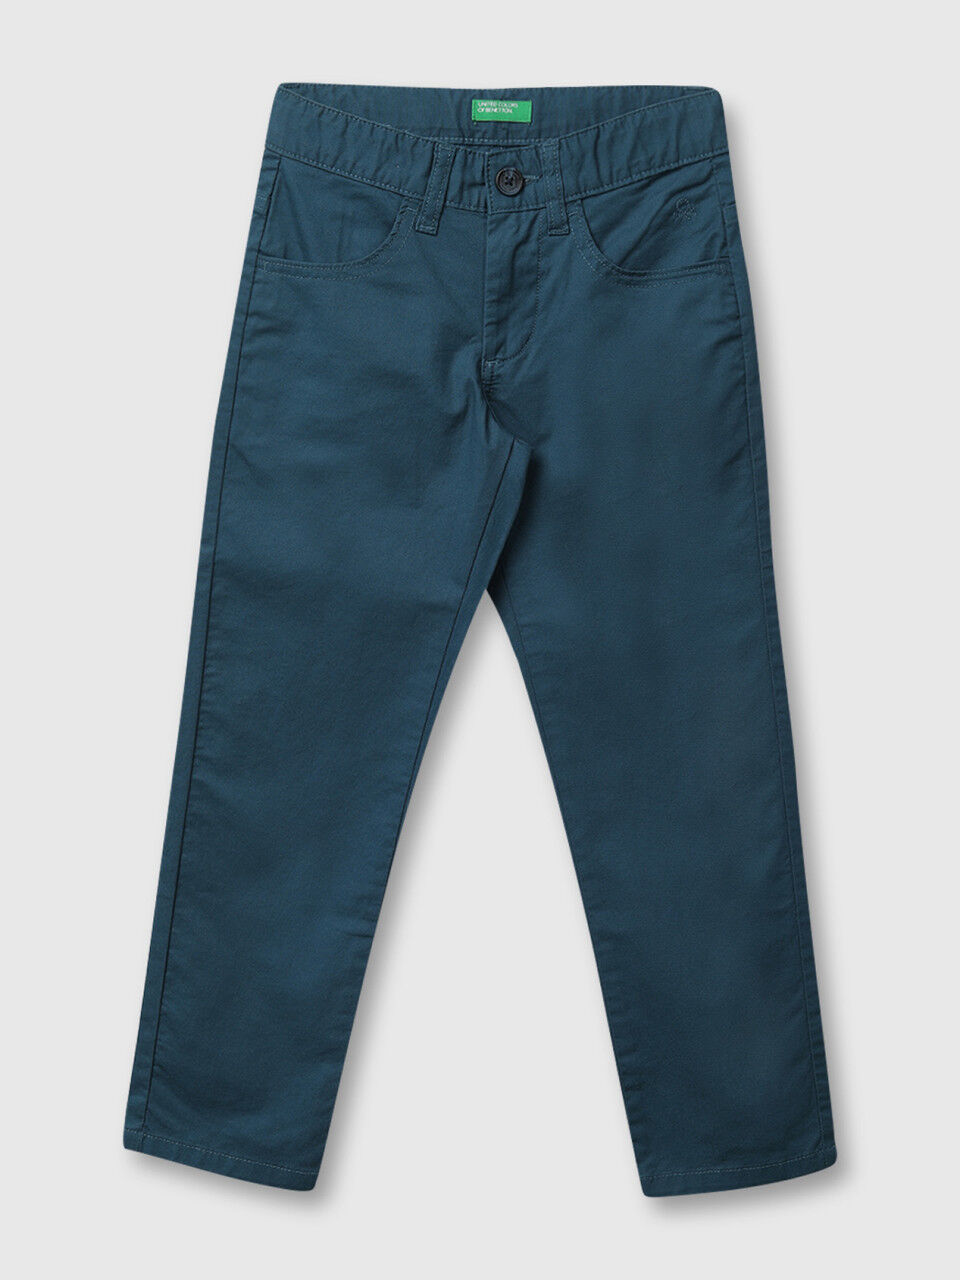 Boys Chinos | Boys Chinos Trousers | Next Official Site